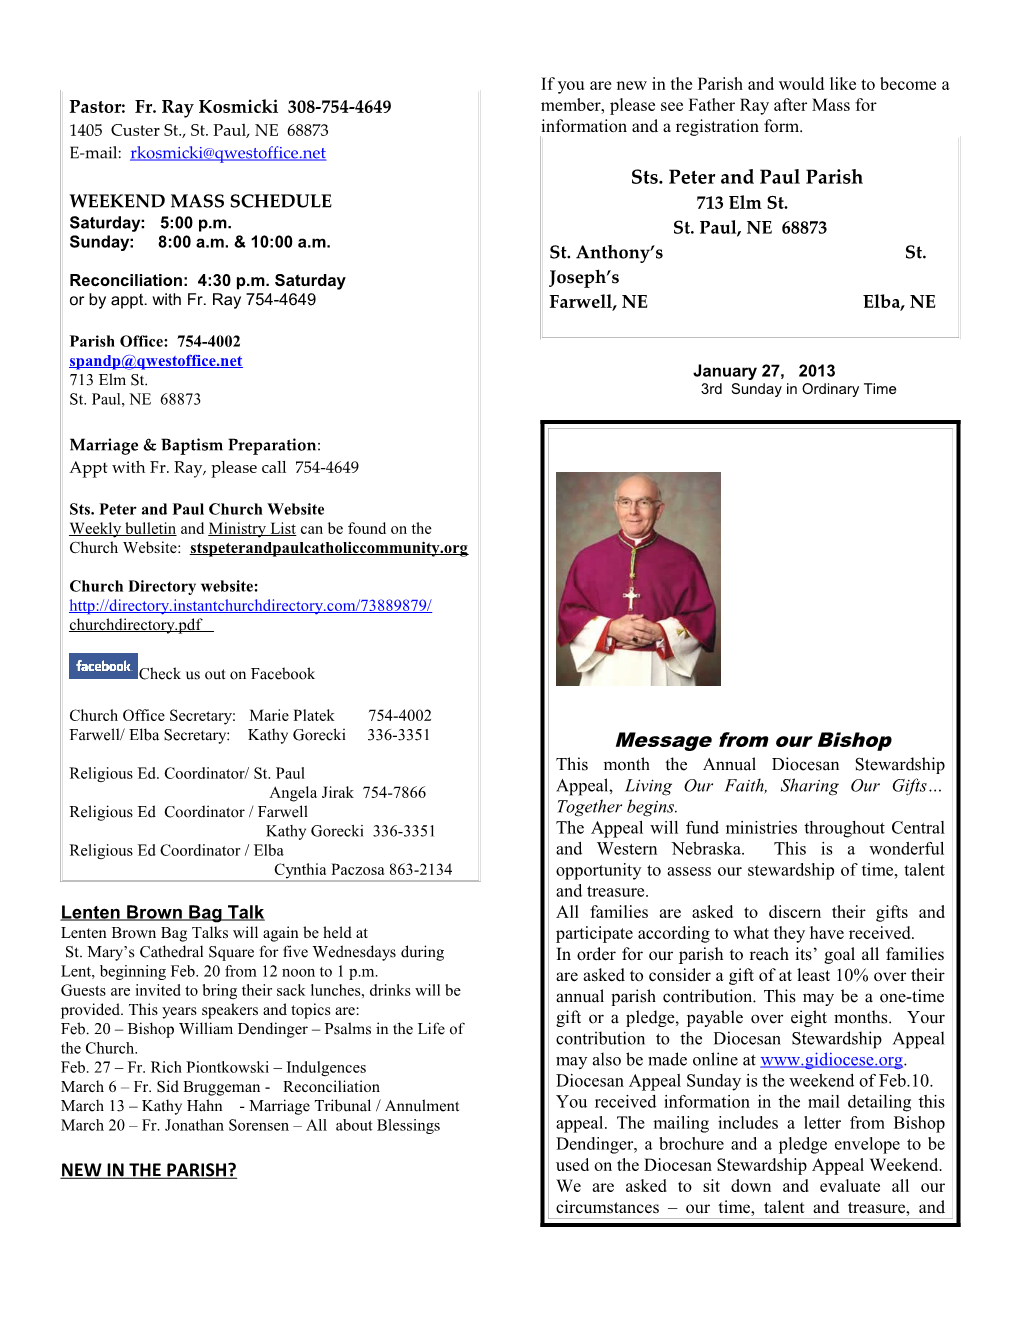 Ministers for Weekend Mass 12/29 12/30